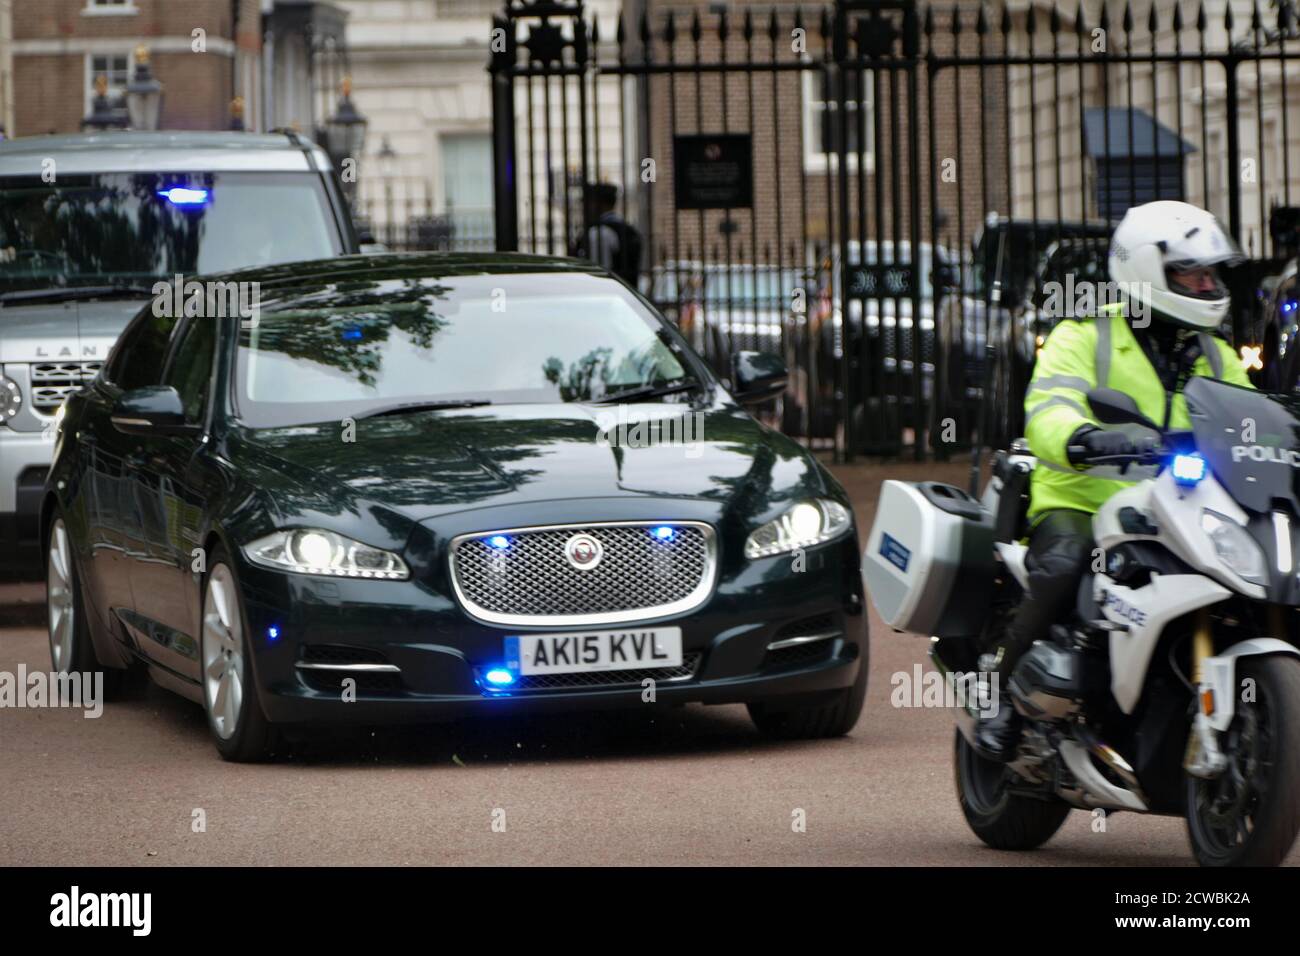 Photograph of the armed police security at St James' Palace for a departing minister after meeting US President Donald Trump, during his visit to London. June 2019 Stock Photo